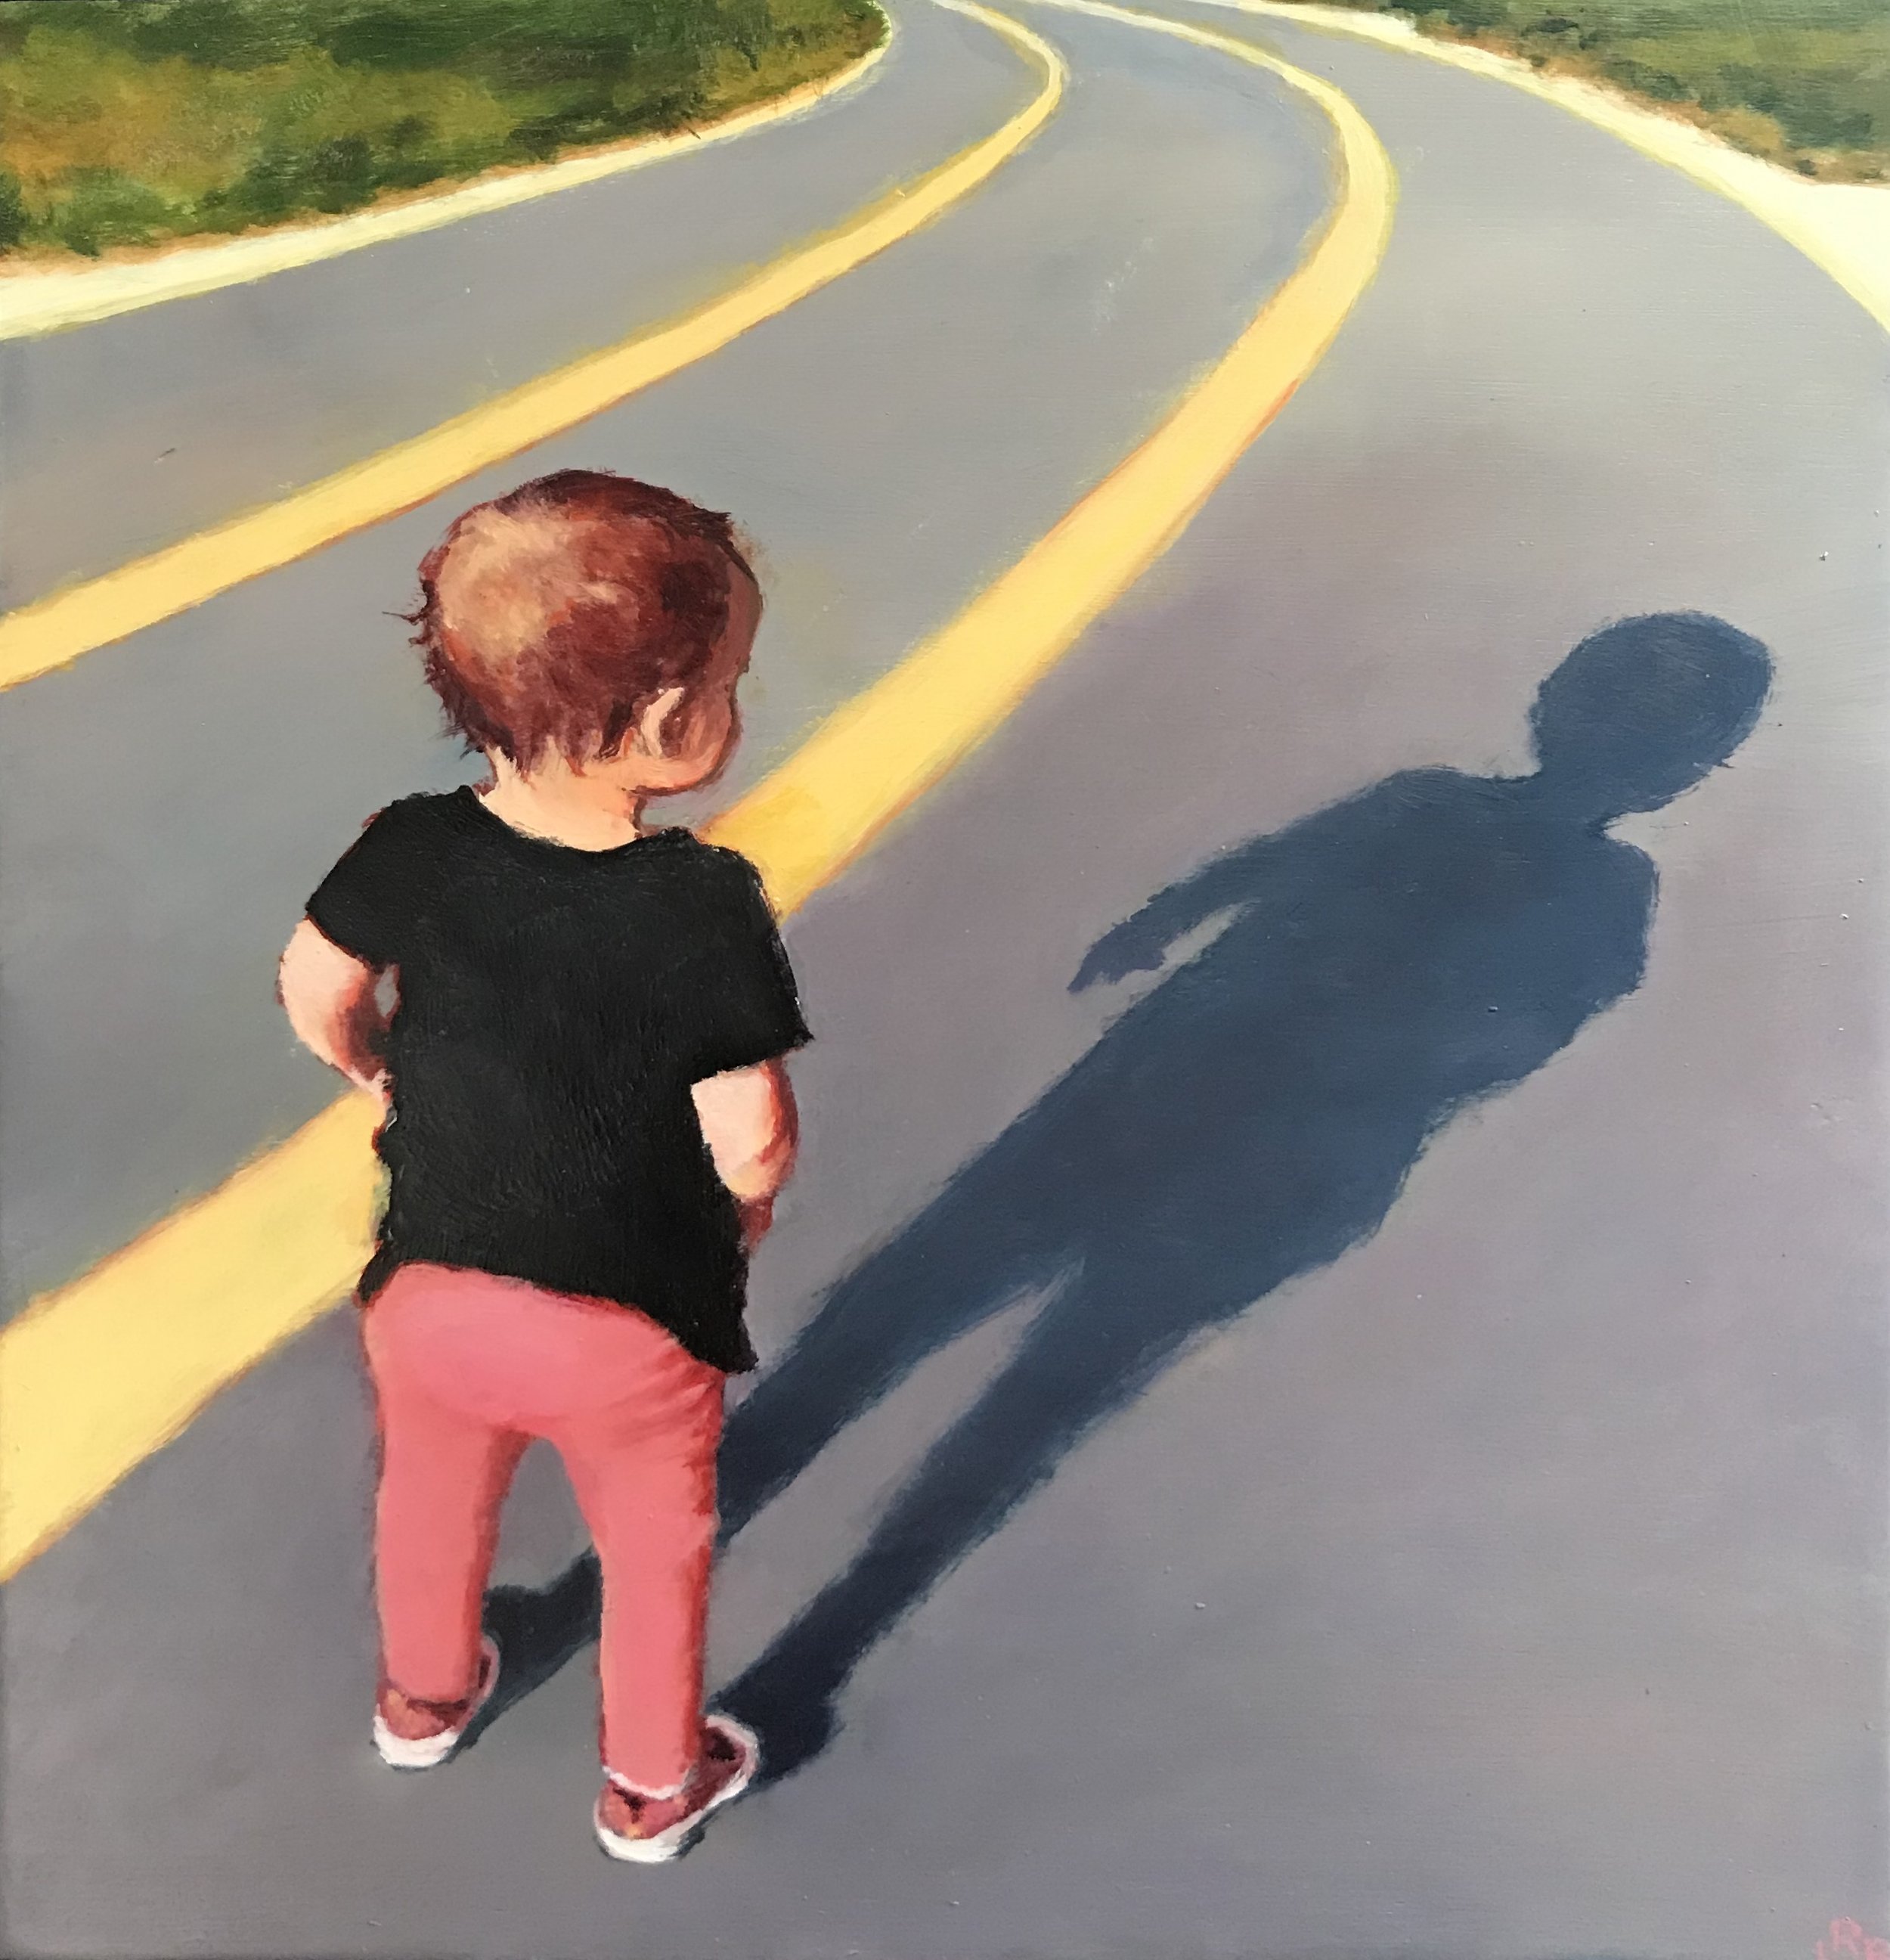  “On Track” 12” x 12”&nbsp;; Oil on wood&nbsp;  $765   Toddler looking at his shadow  